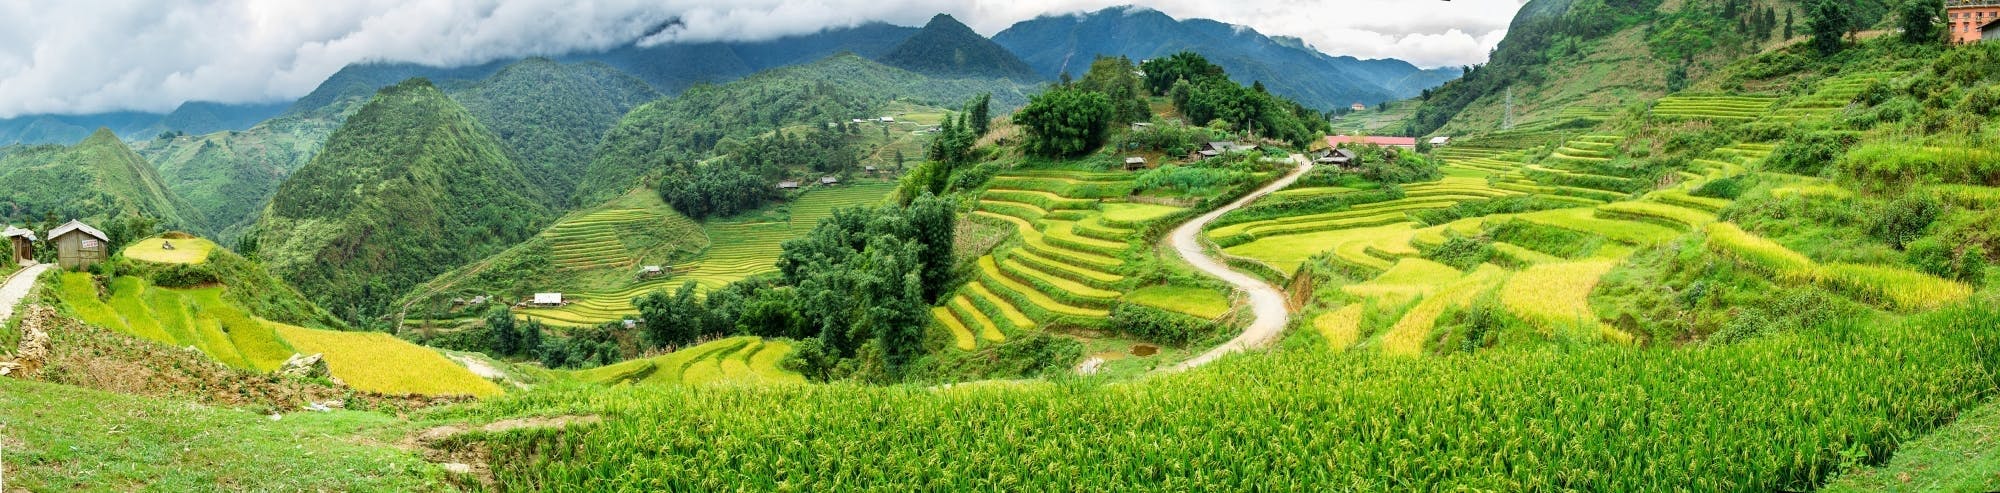 3-day shared trip to Sapa from Hanoi Musement